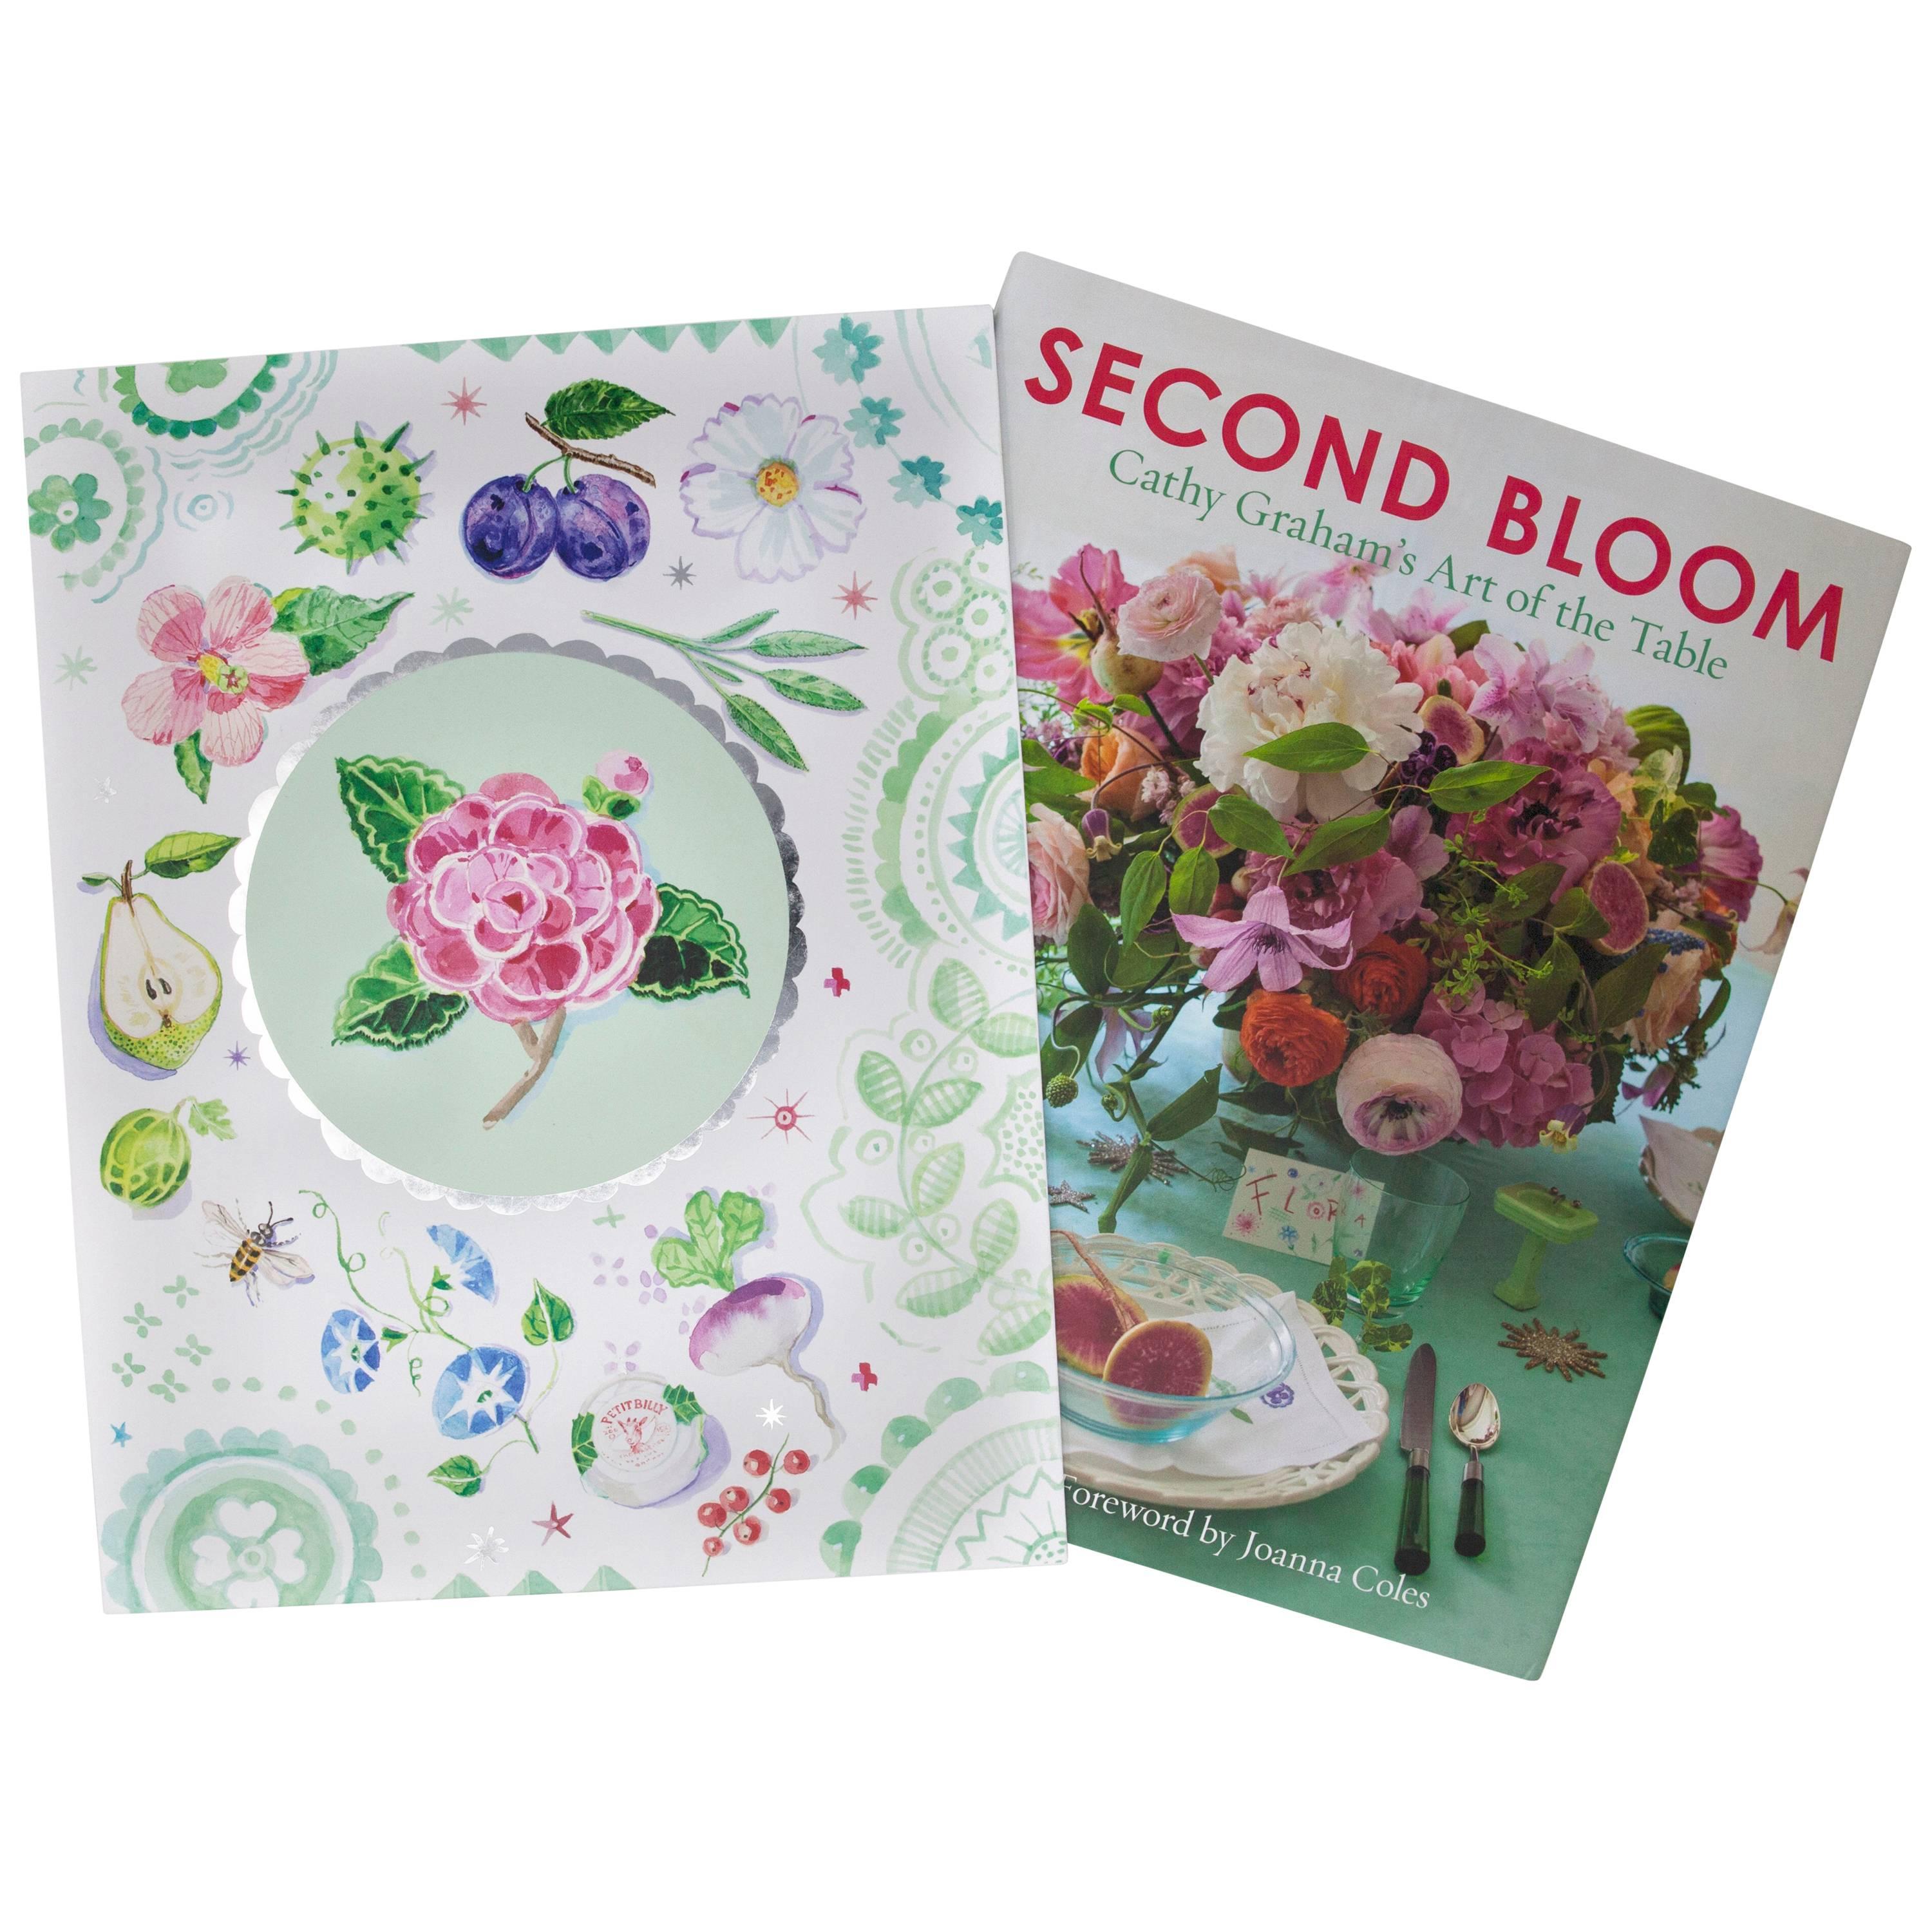 Cathy Graham Custom Designed Slipcase Edition of ‘Second Bloom' For Sale